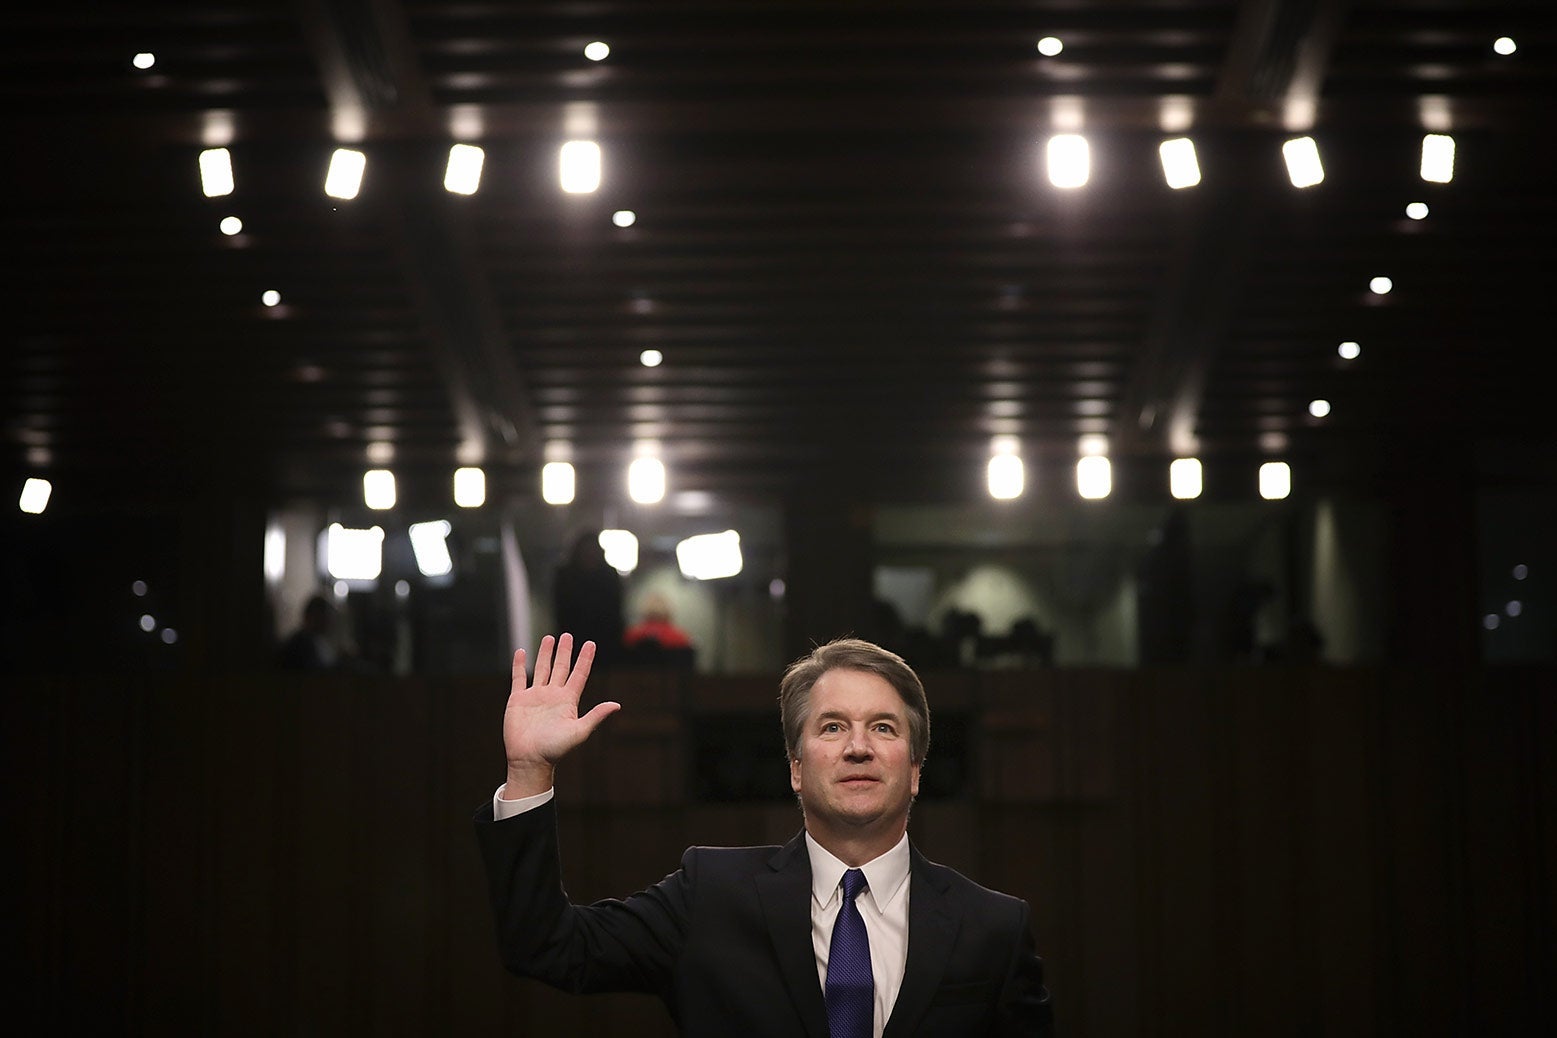 Brett Kavanaugh being sworn in before the Senate Judiciary Committee during his Supreme Court confirmation hearing on Sept. 4, 2018.